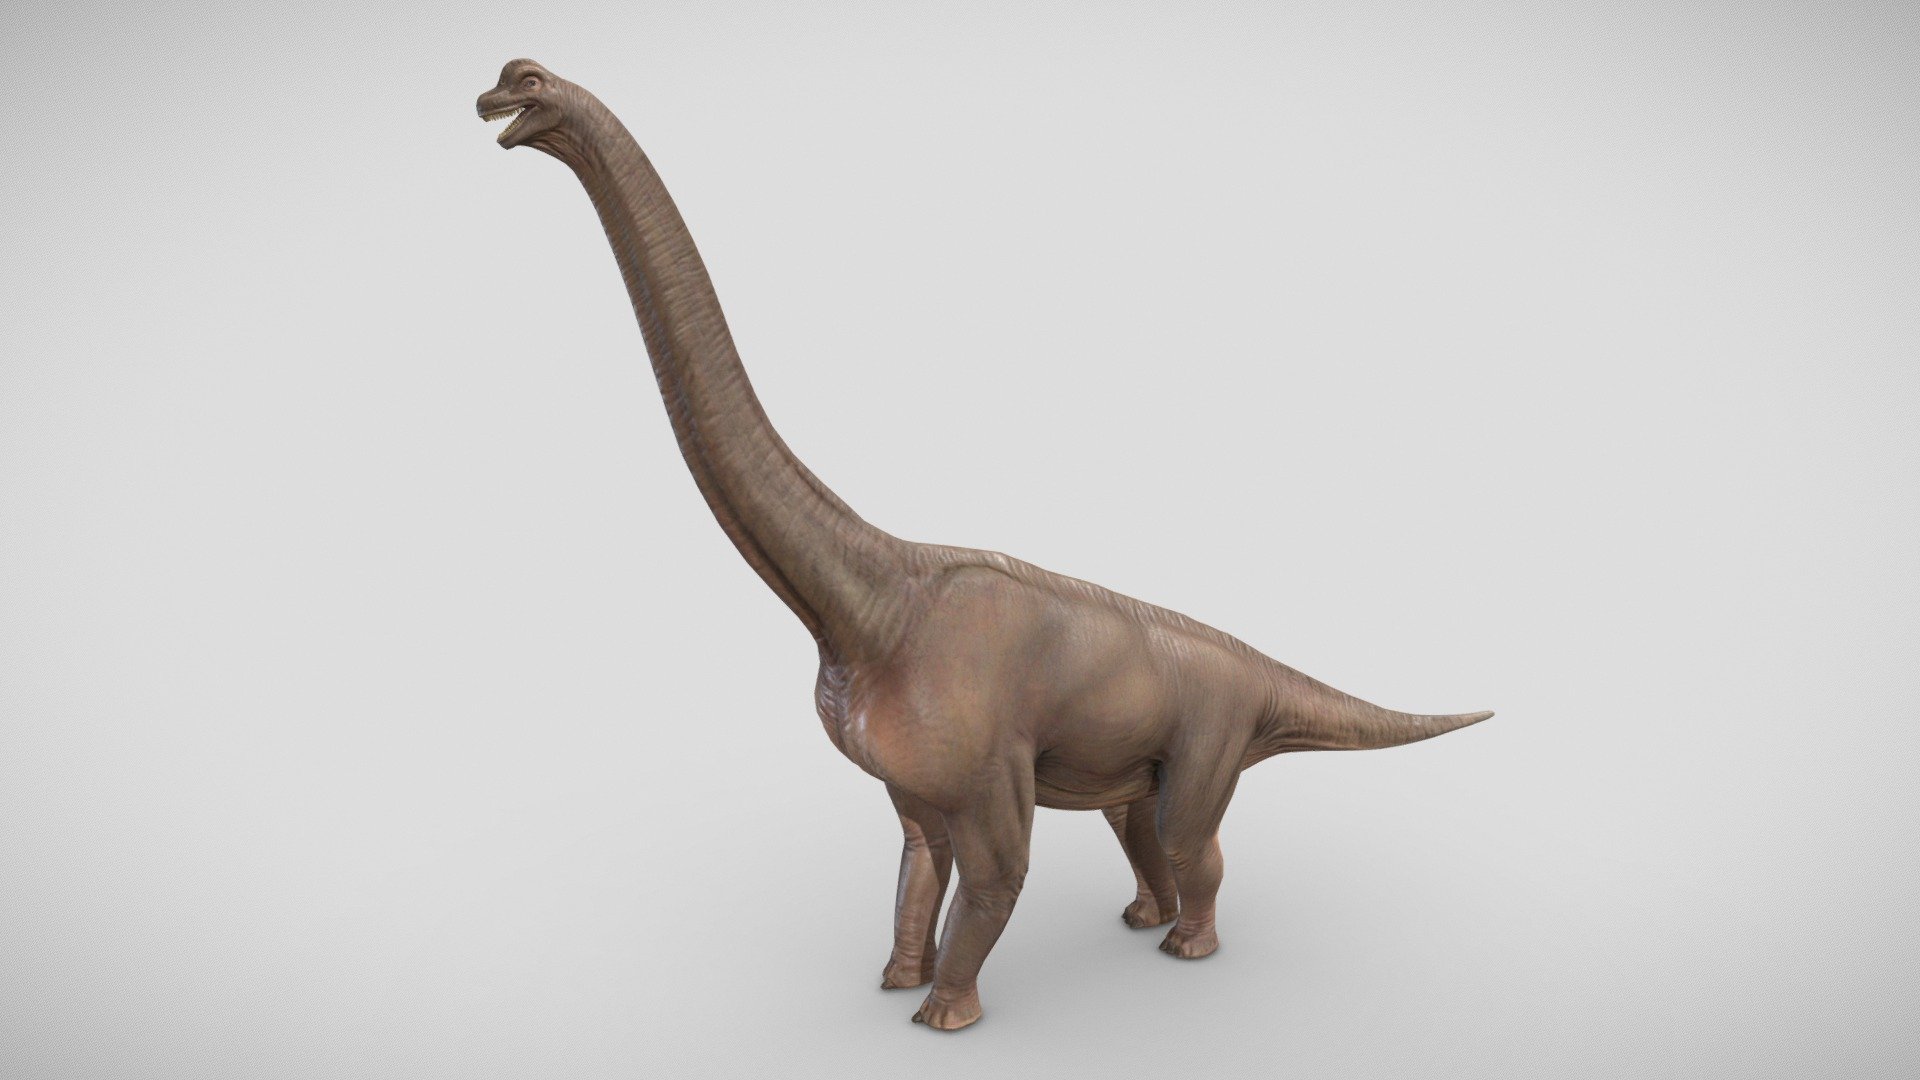 A low-poly Brachiosaurus model with textures.

Normal map is 8192 or 4096.

Color, Specular/Gloss, Occlusion, Cavity, and Displacement maps are 4096.

Collada, FBX, and OBJ formats included 3d model